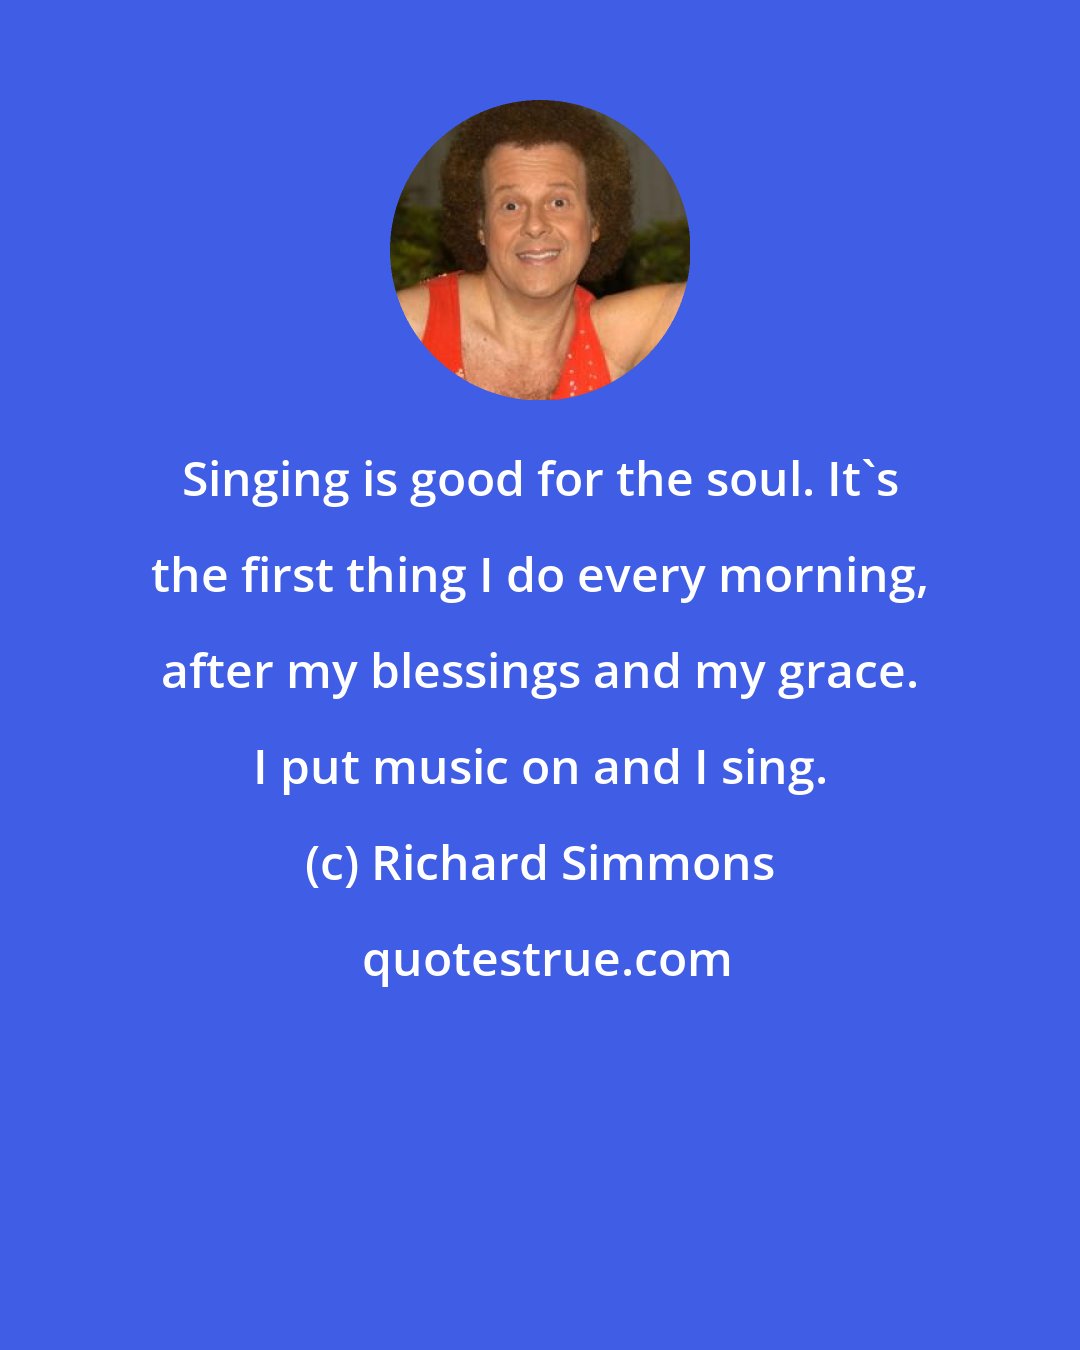 Richard Simmons: Singing is good for the soul. It's the first thing I do every morning, after my blessings and my grace. I put music on and I sing.